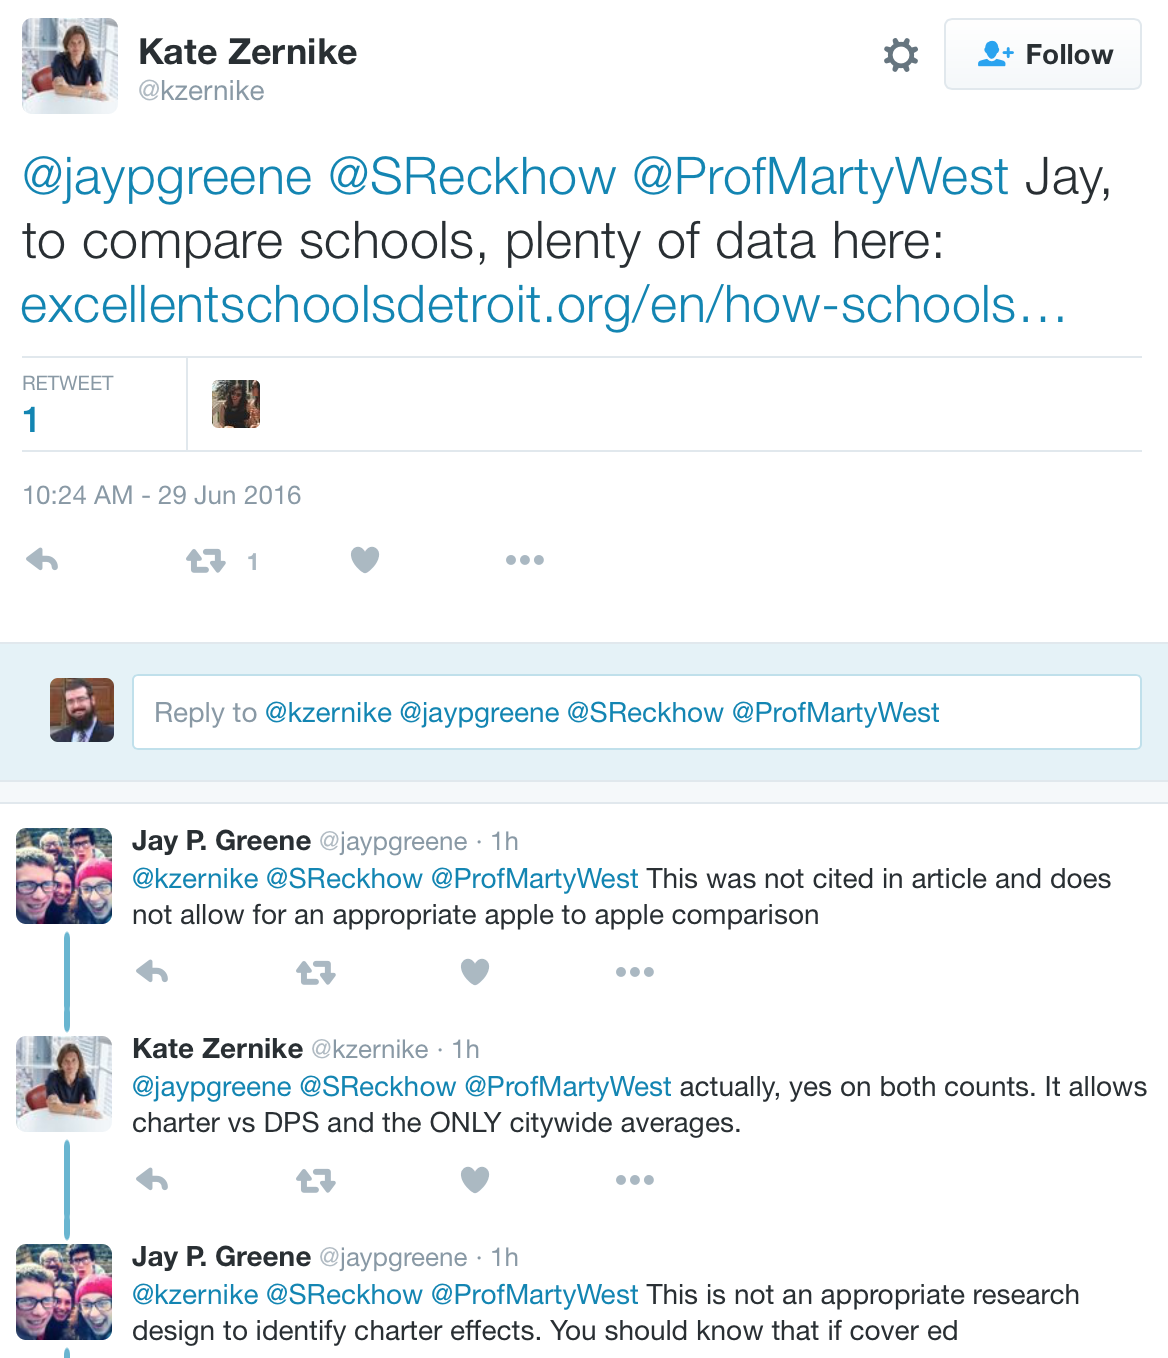 Twitter exchange over NYT's misleading reporting on charter schools